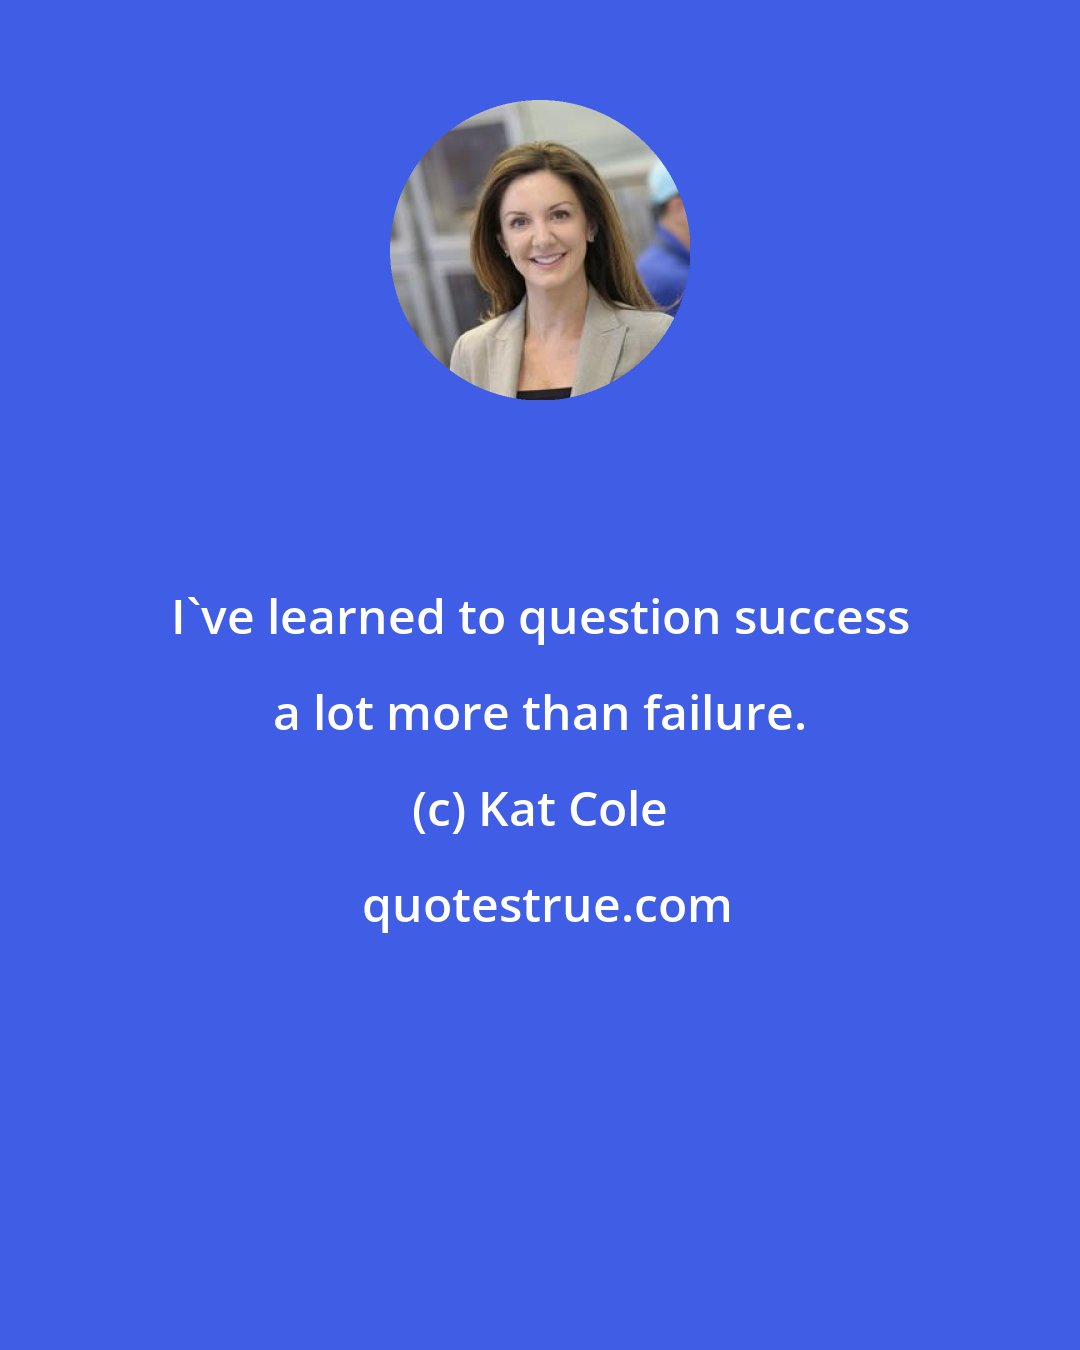 Kat Cole: I've learned to question success a lot more than failure.